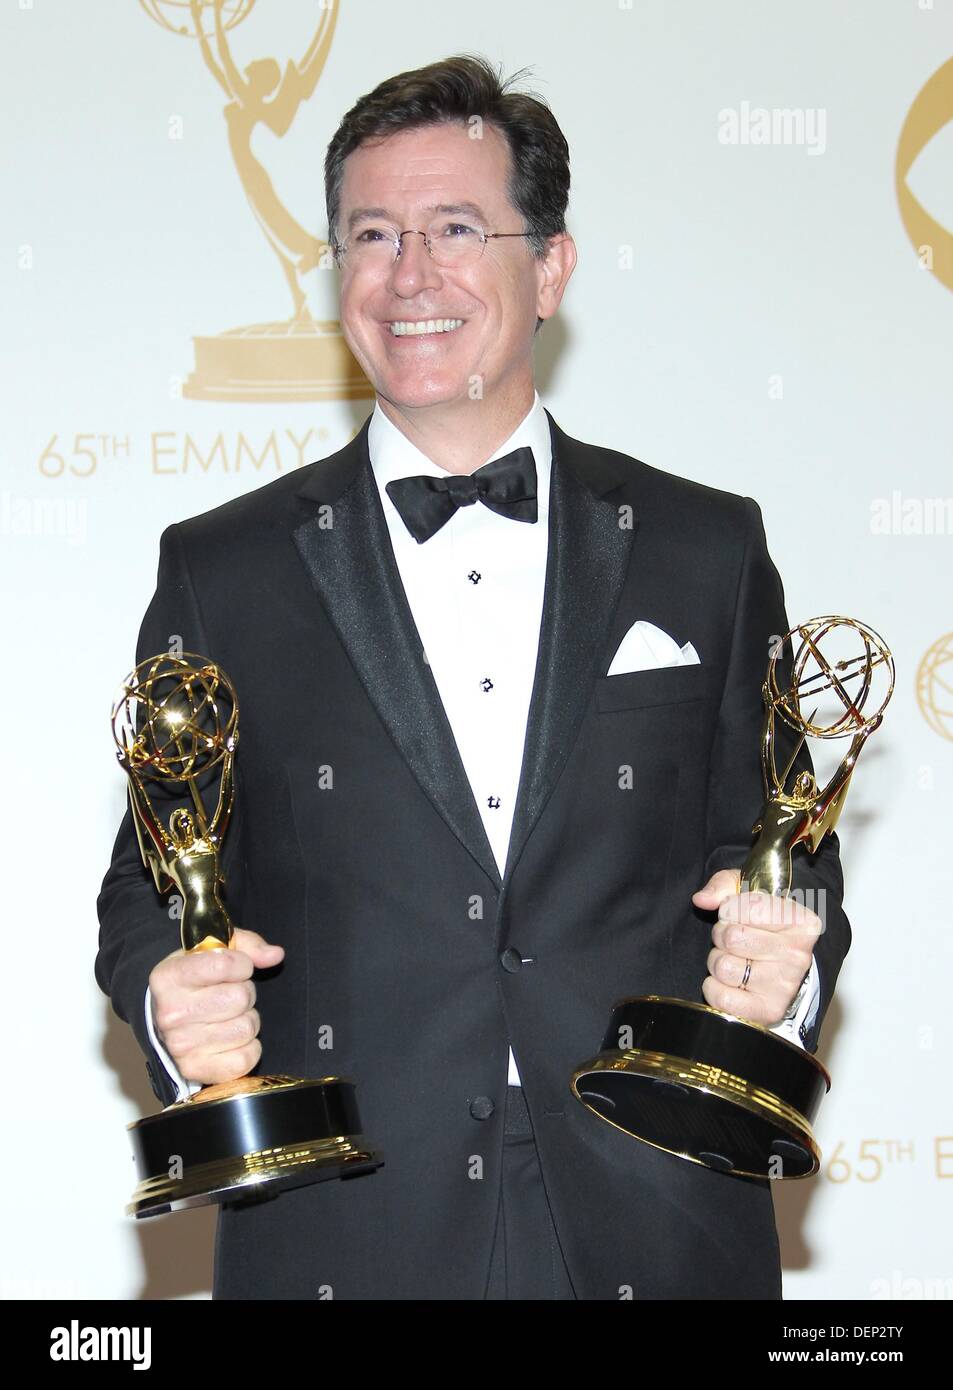 Los Angeles, CA. 22nd Sep, 2013. Stephen Colbert, Best Variety Series and WRITING on a Variety Series, THE COLBERT REPORT in the press room for The 65th Primetime Emmy Awards - PRESS ROOM, Nokia Theatre L.A. Live, Los Angeles, CA September 22, 2013. Credit:  James Atoa/Everett Collection/Alamy Live News Stock Photo